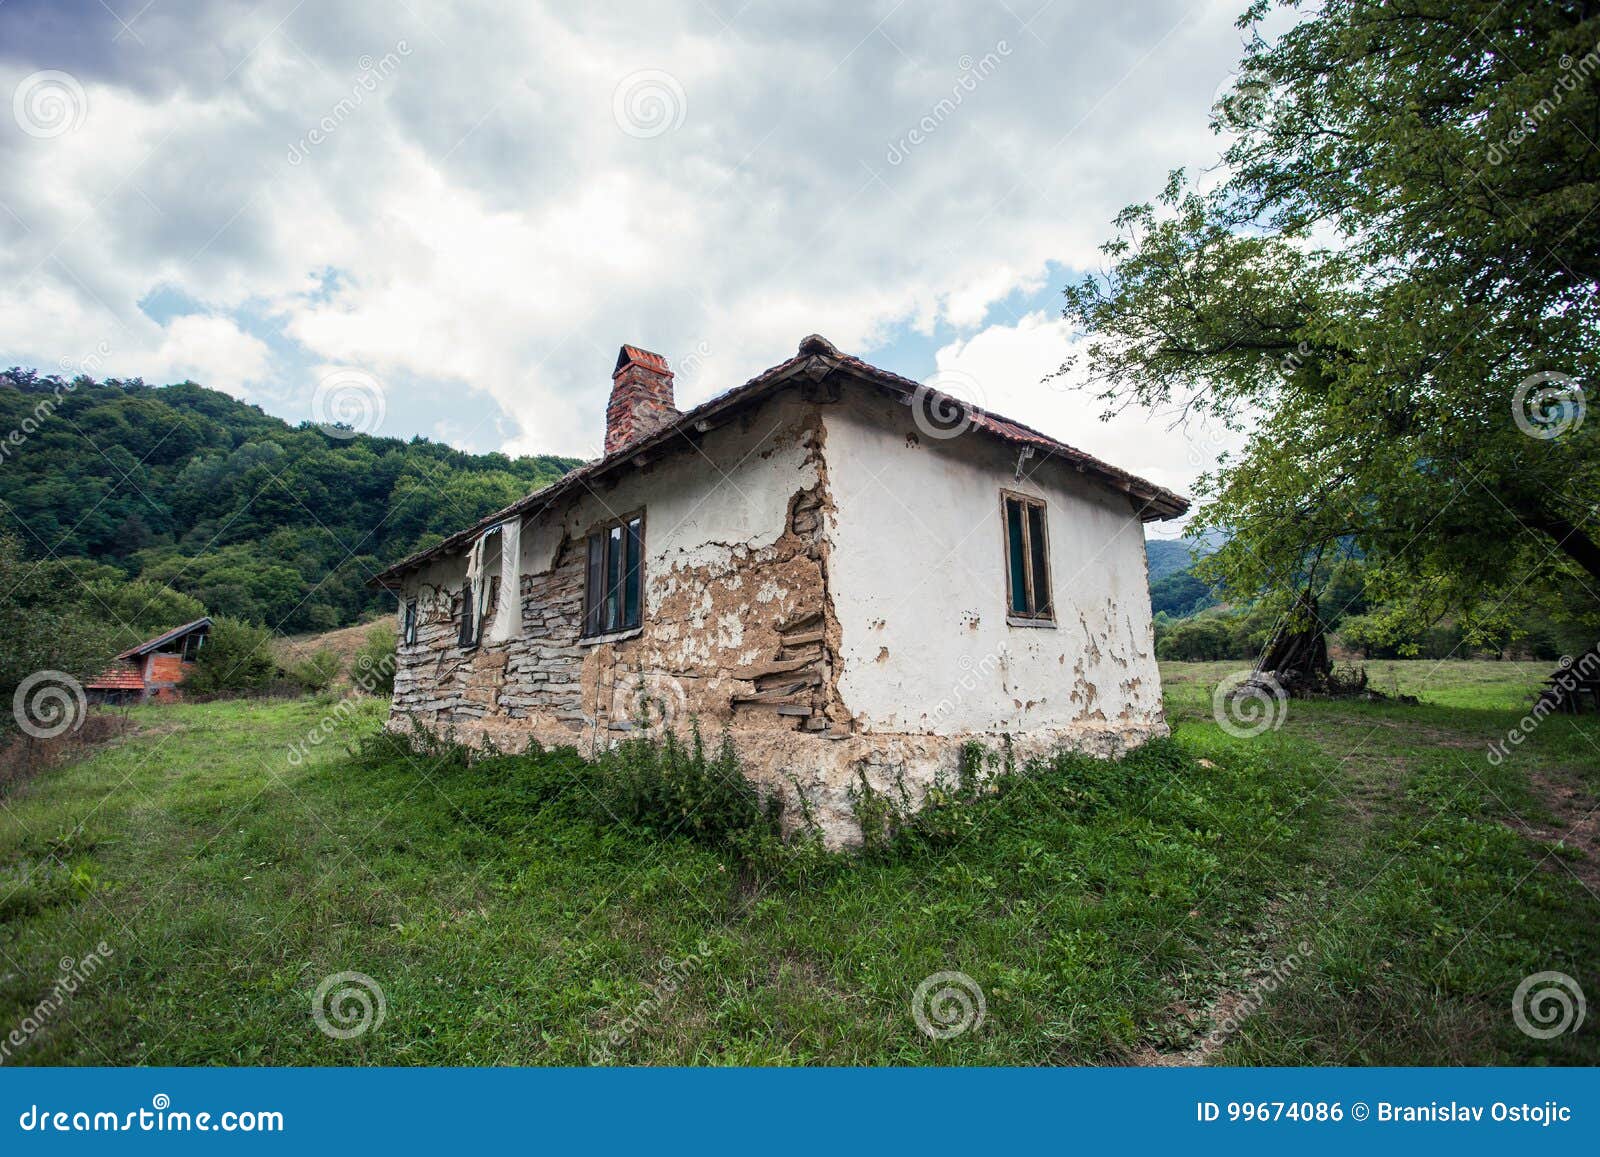 Abandoned Old House in Rural Mountain Landscape Stock Photo - Image of ...